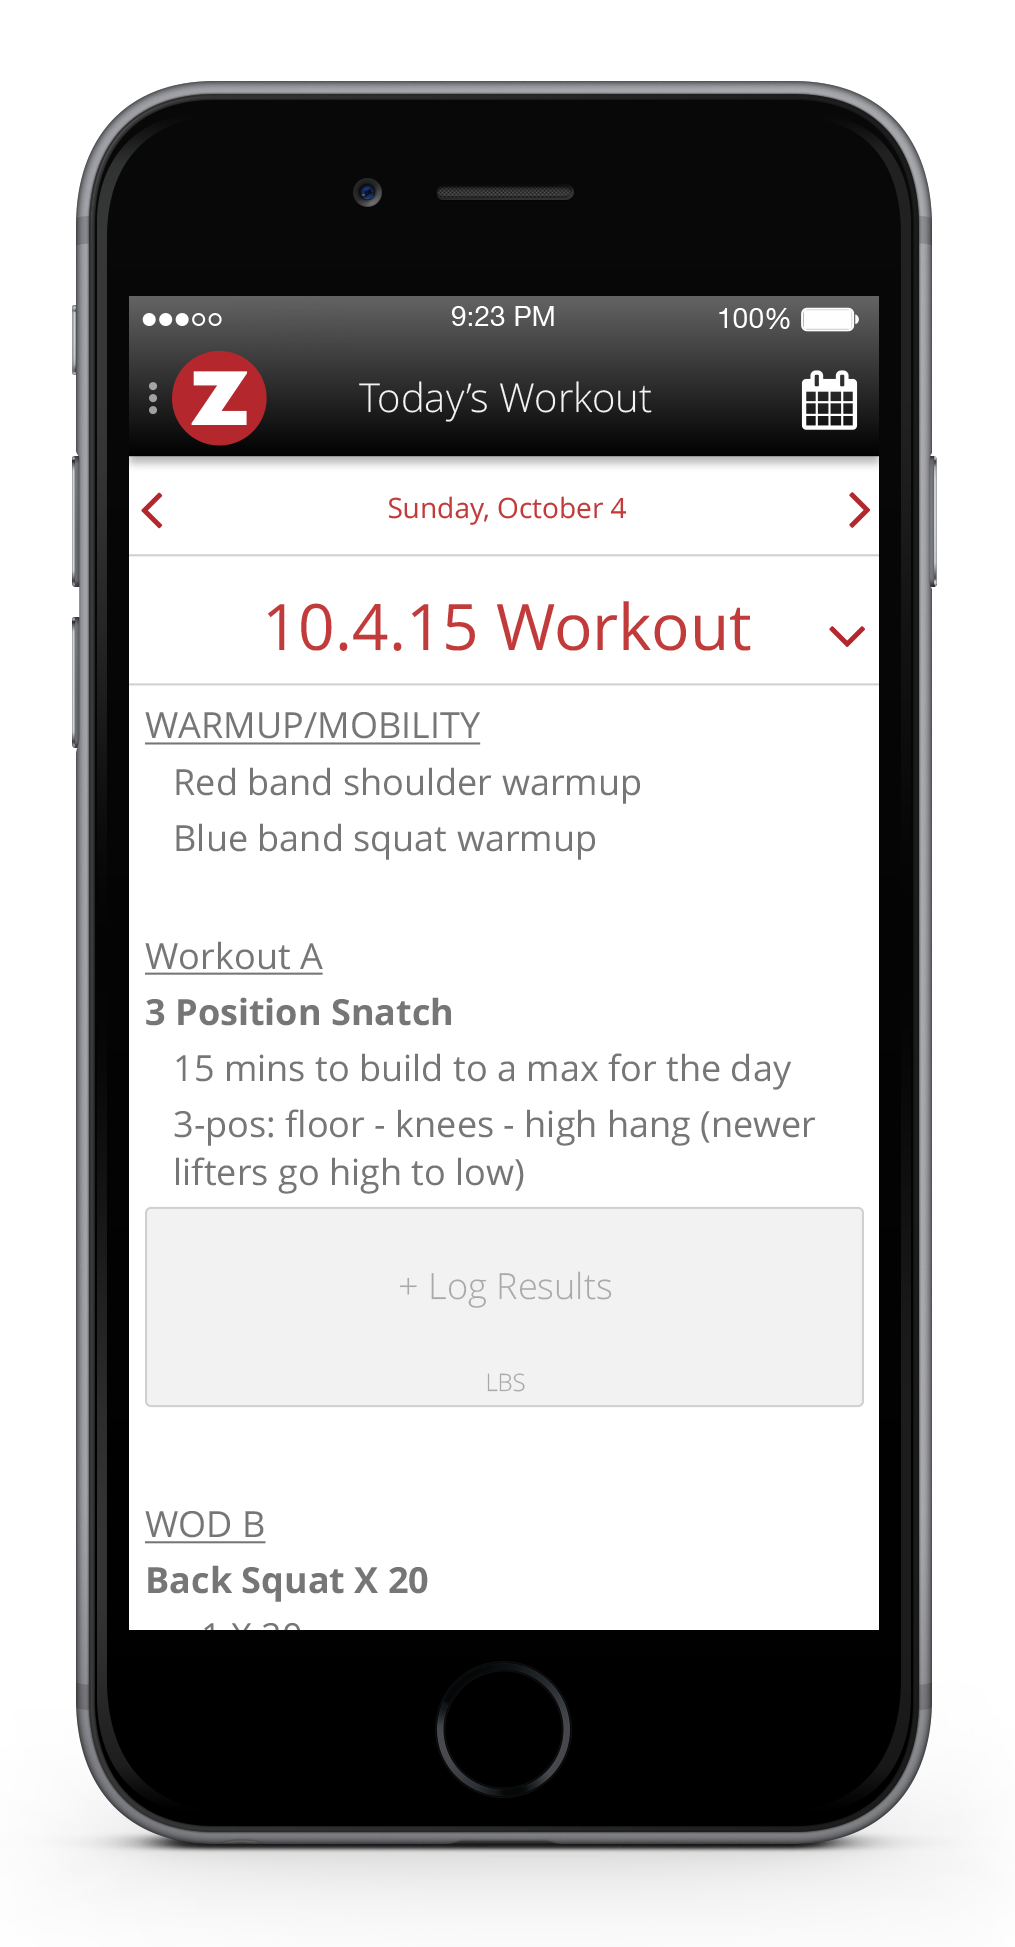 Zen Planner Software - Engage your community and increase accountability with in-app Advanced Workout Tracking features. Members can quickly check the day's workout, log their results and view your community leaderboard conveniently from their mobile device.